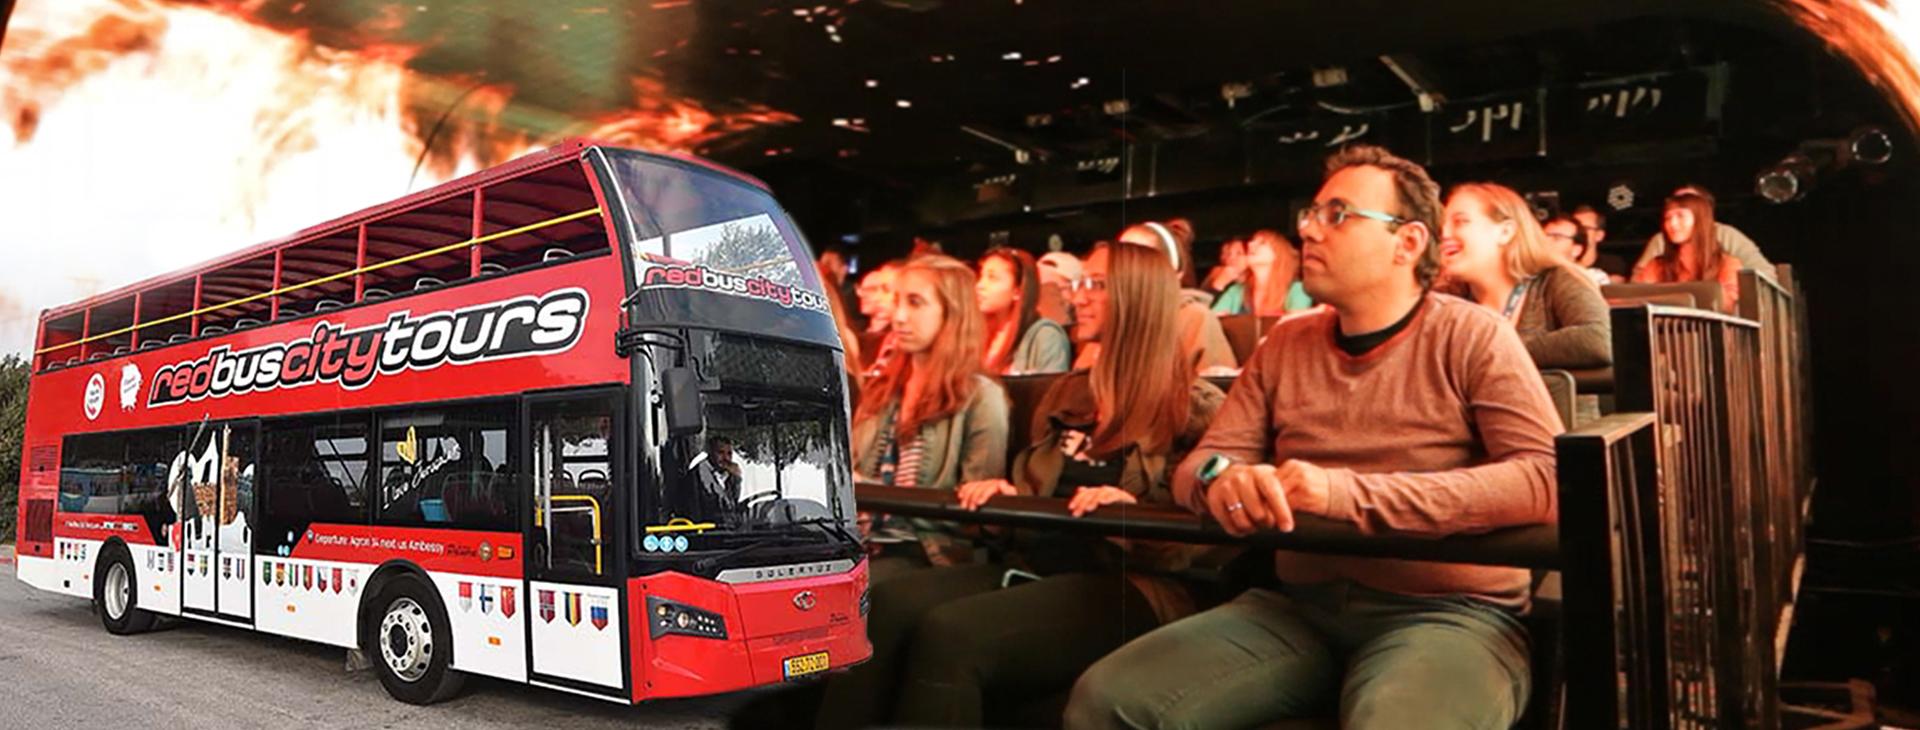 The Time Elevator and Double-decker bus tour combo